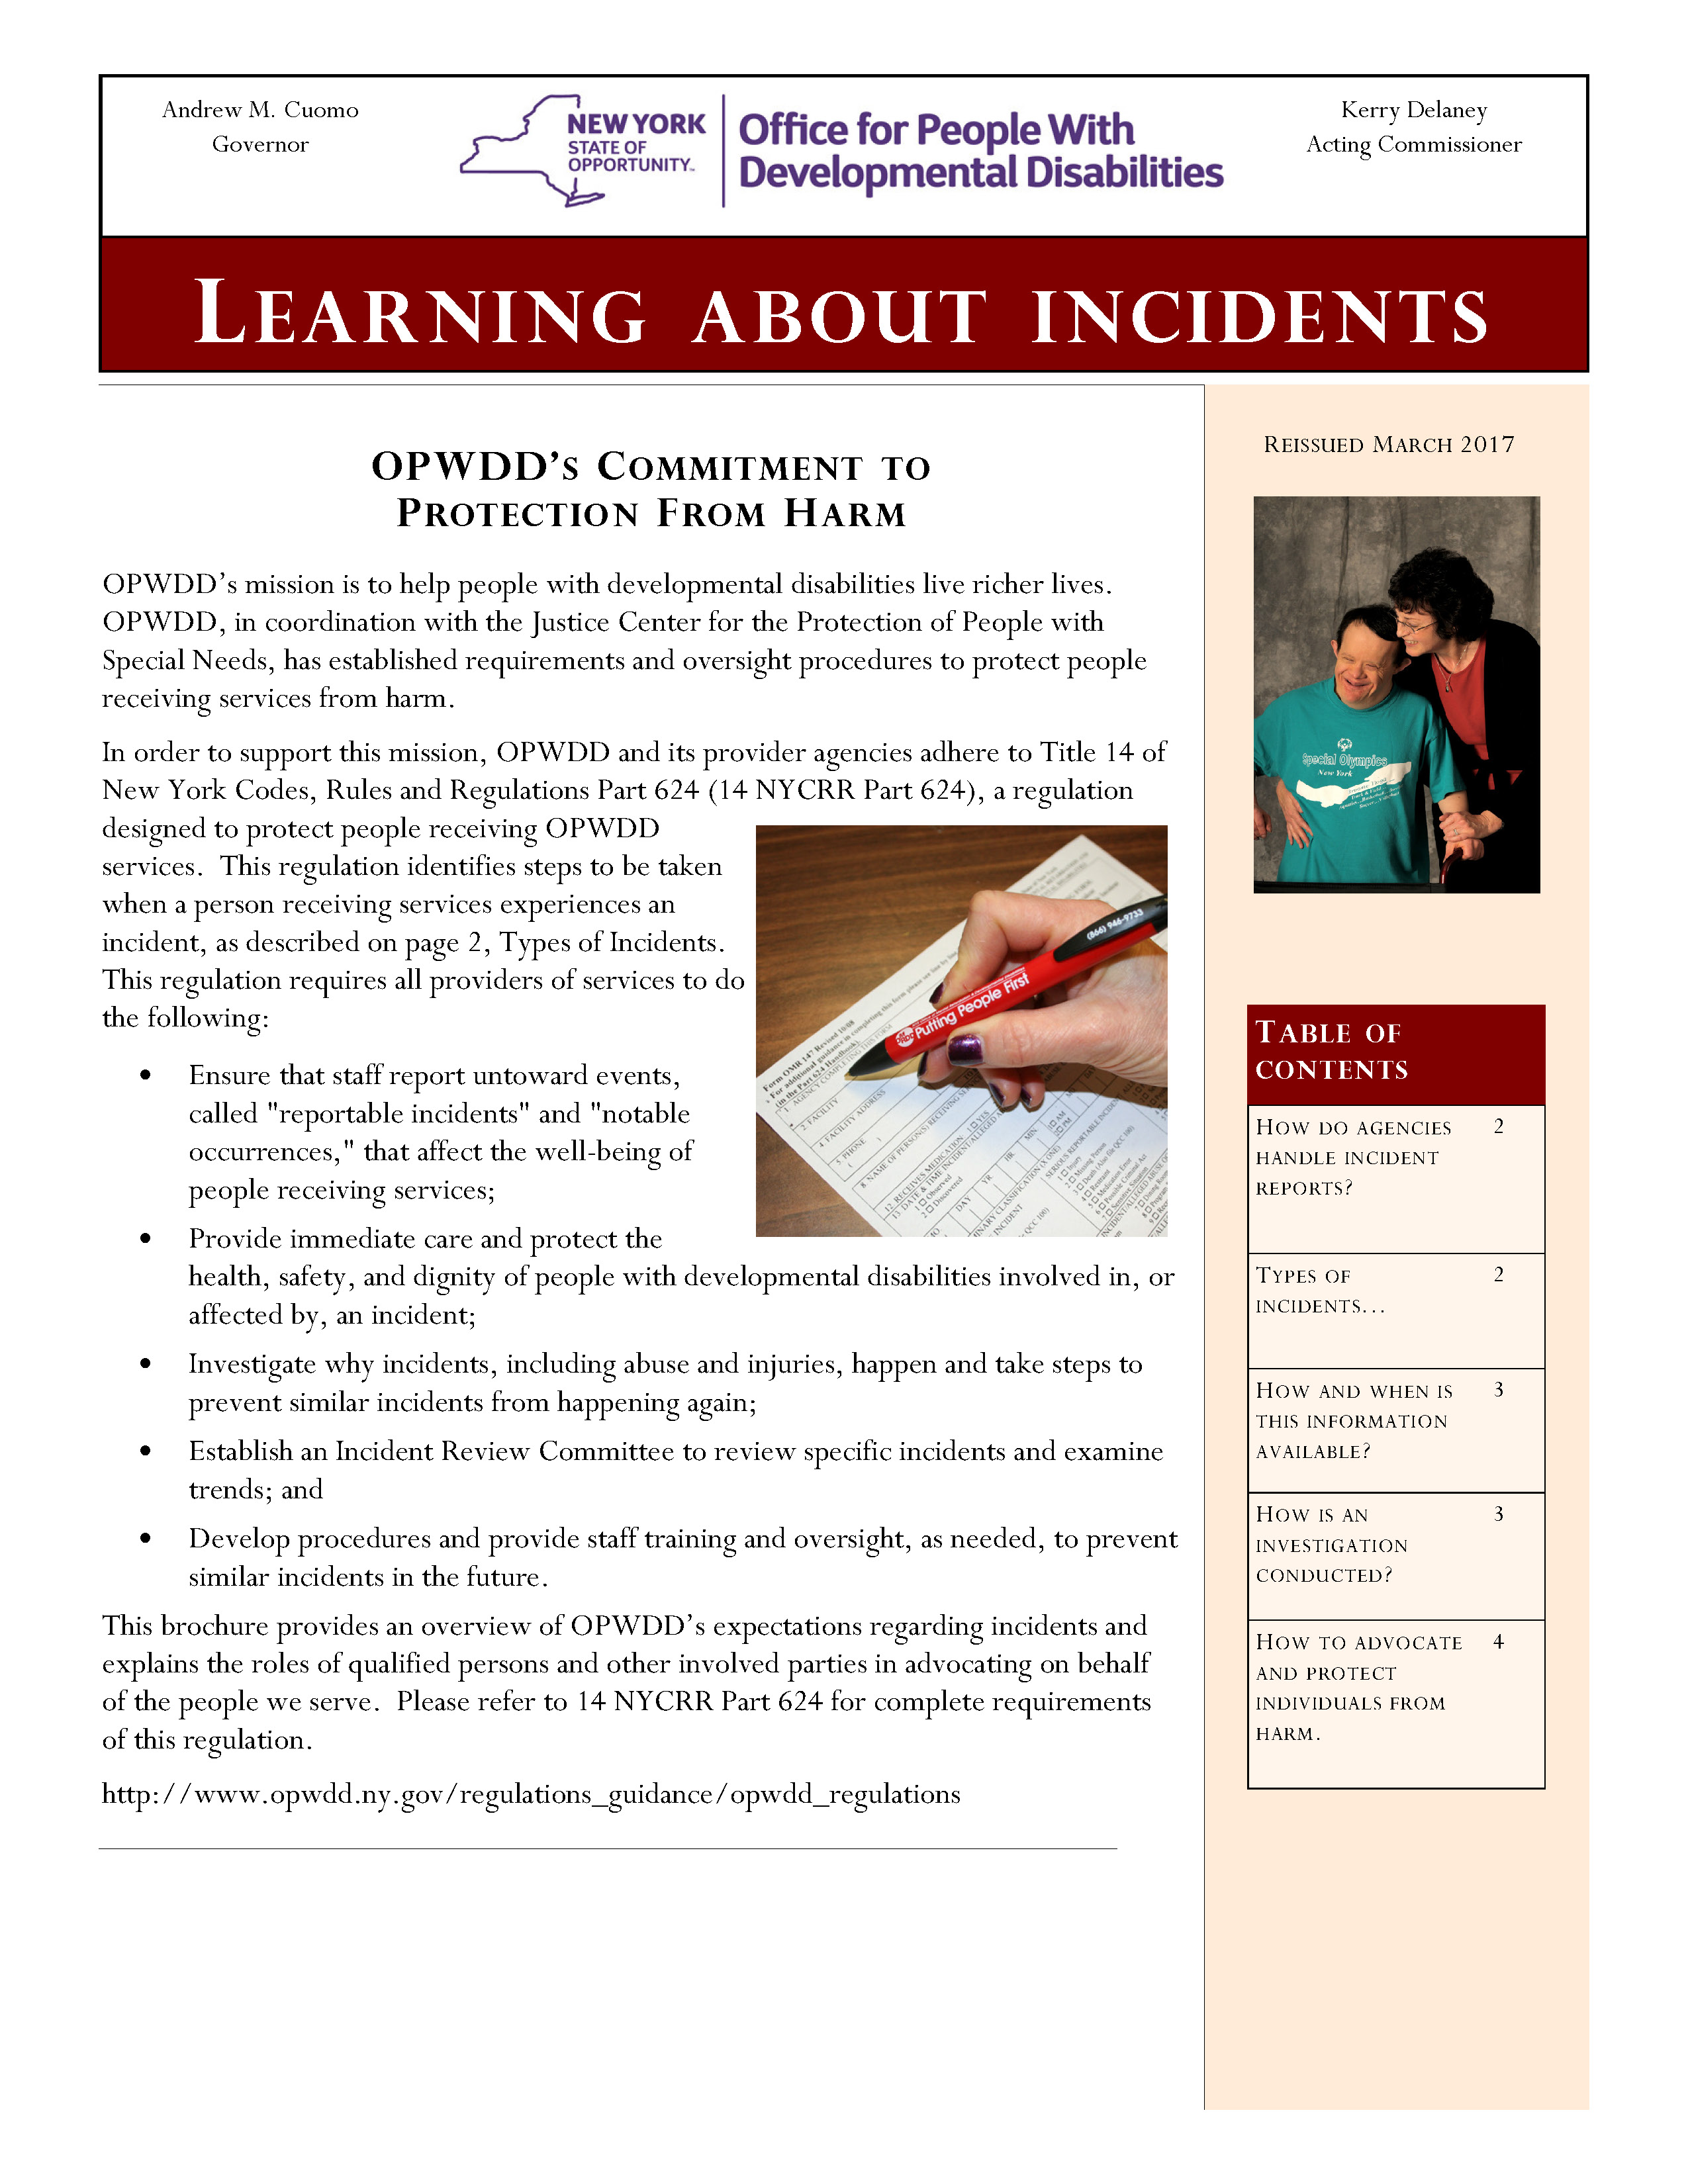 Learning About Incidents - OPWDD - Racker Ithaca, NY